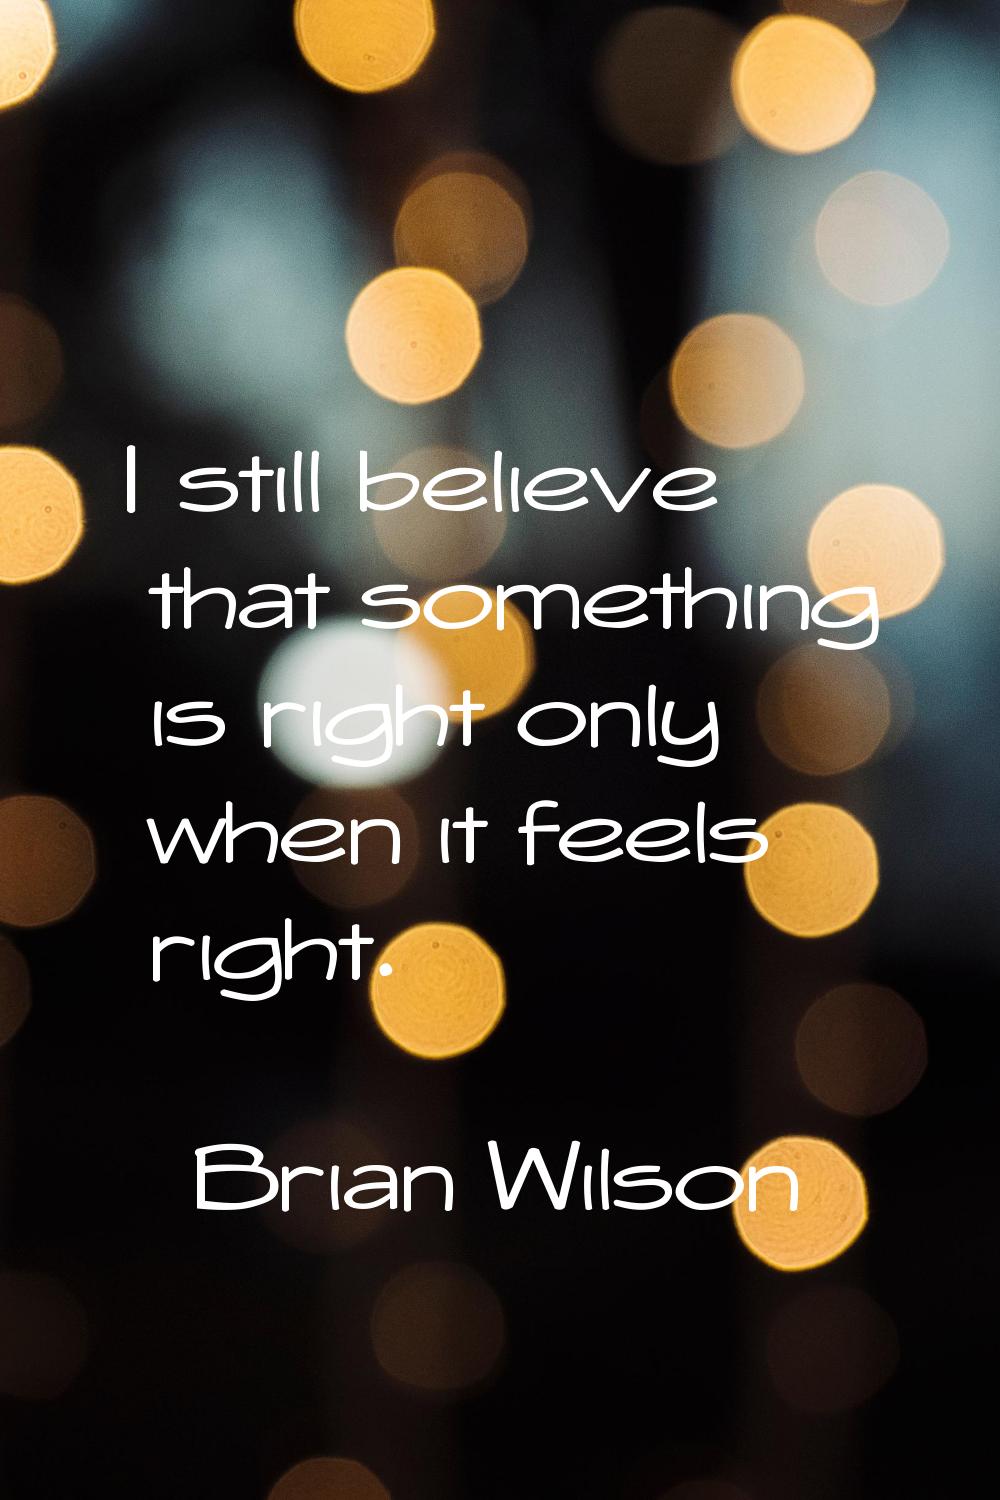 I still believe that something is right only when it feels right.